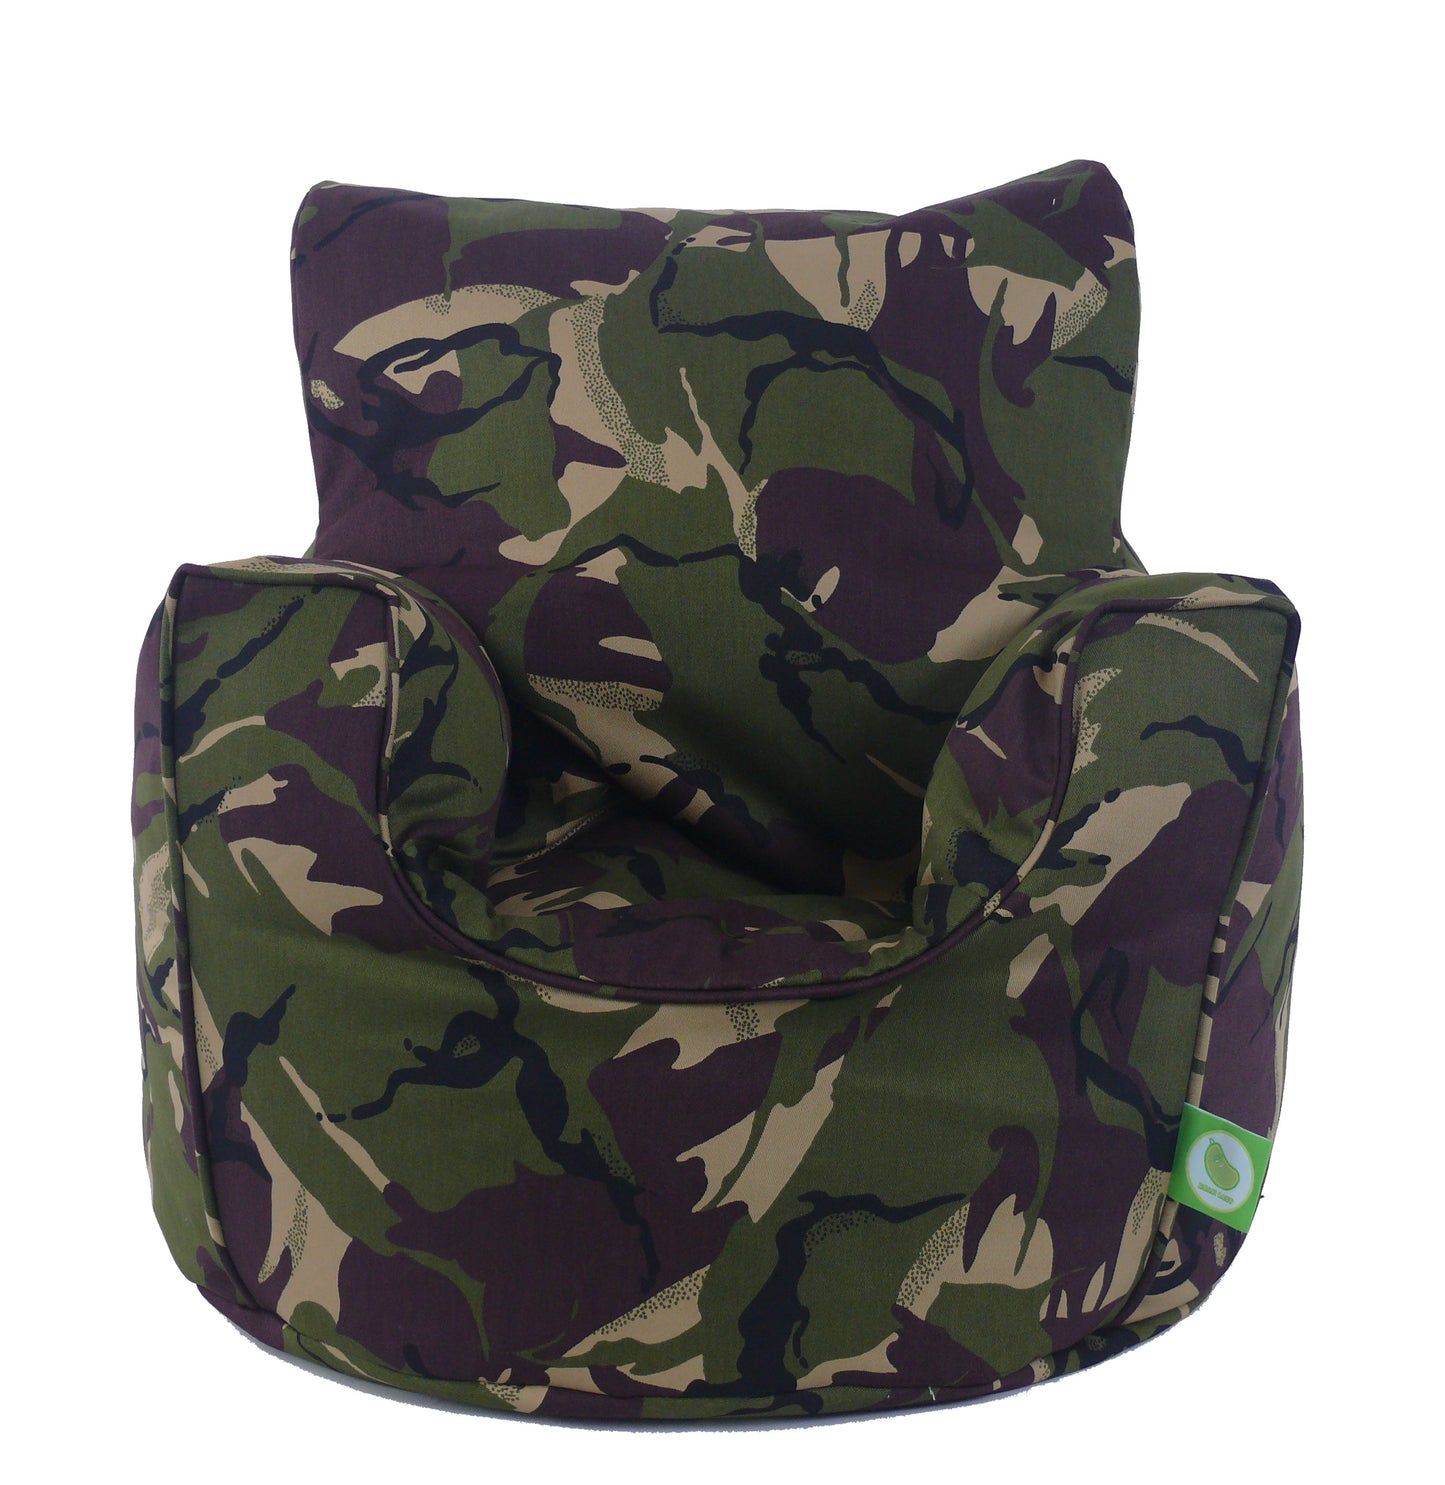 Cotton Green Army Camo Bean Bag Arm Chair with Beans Child / Teen size